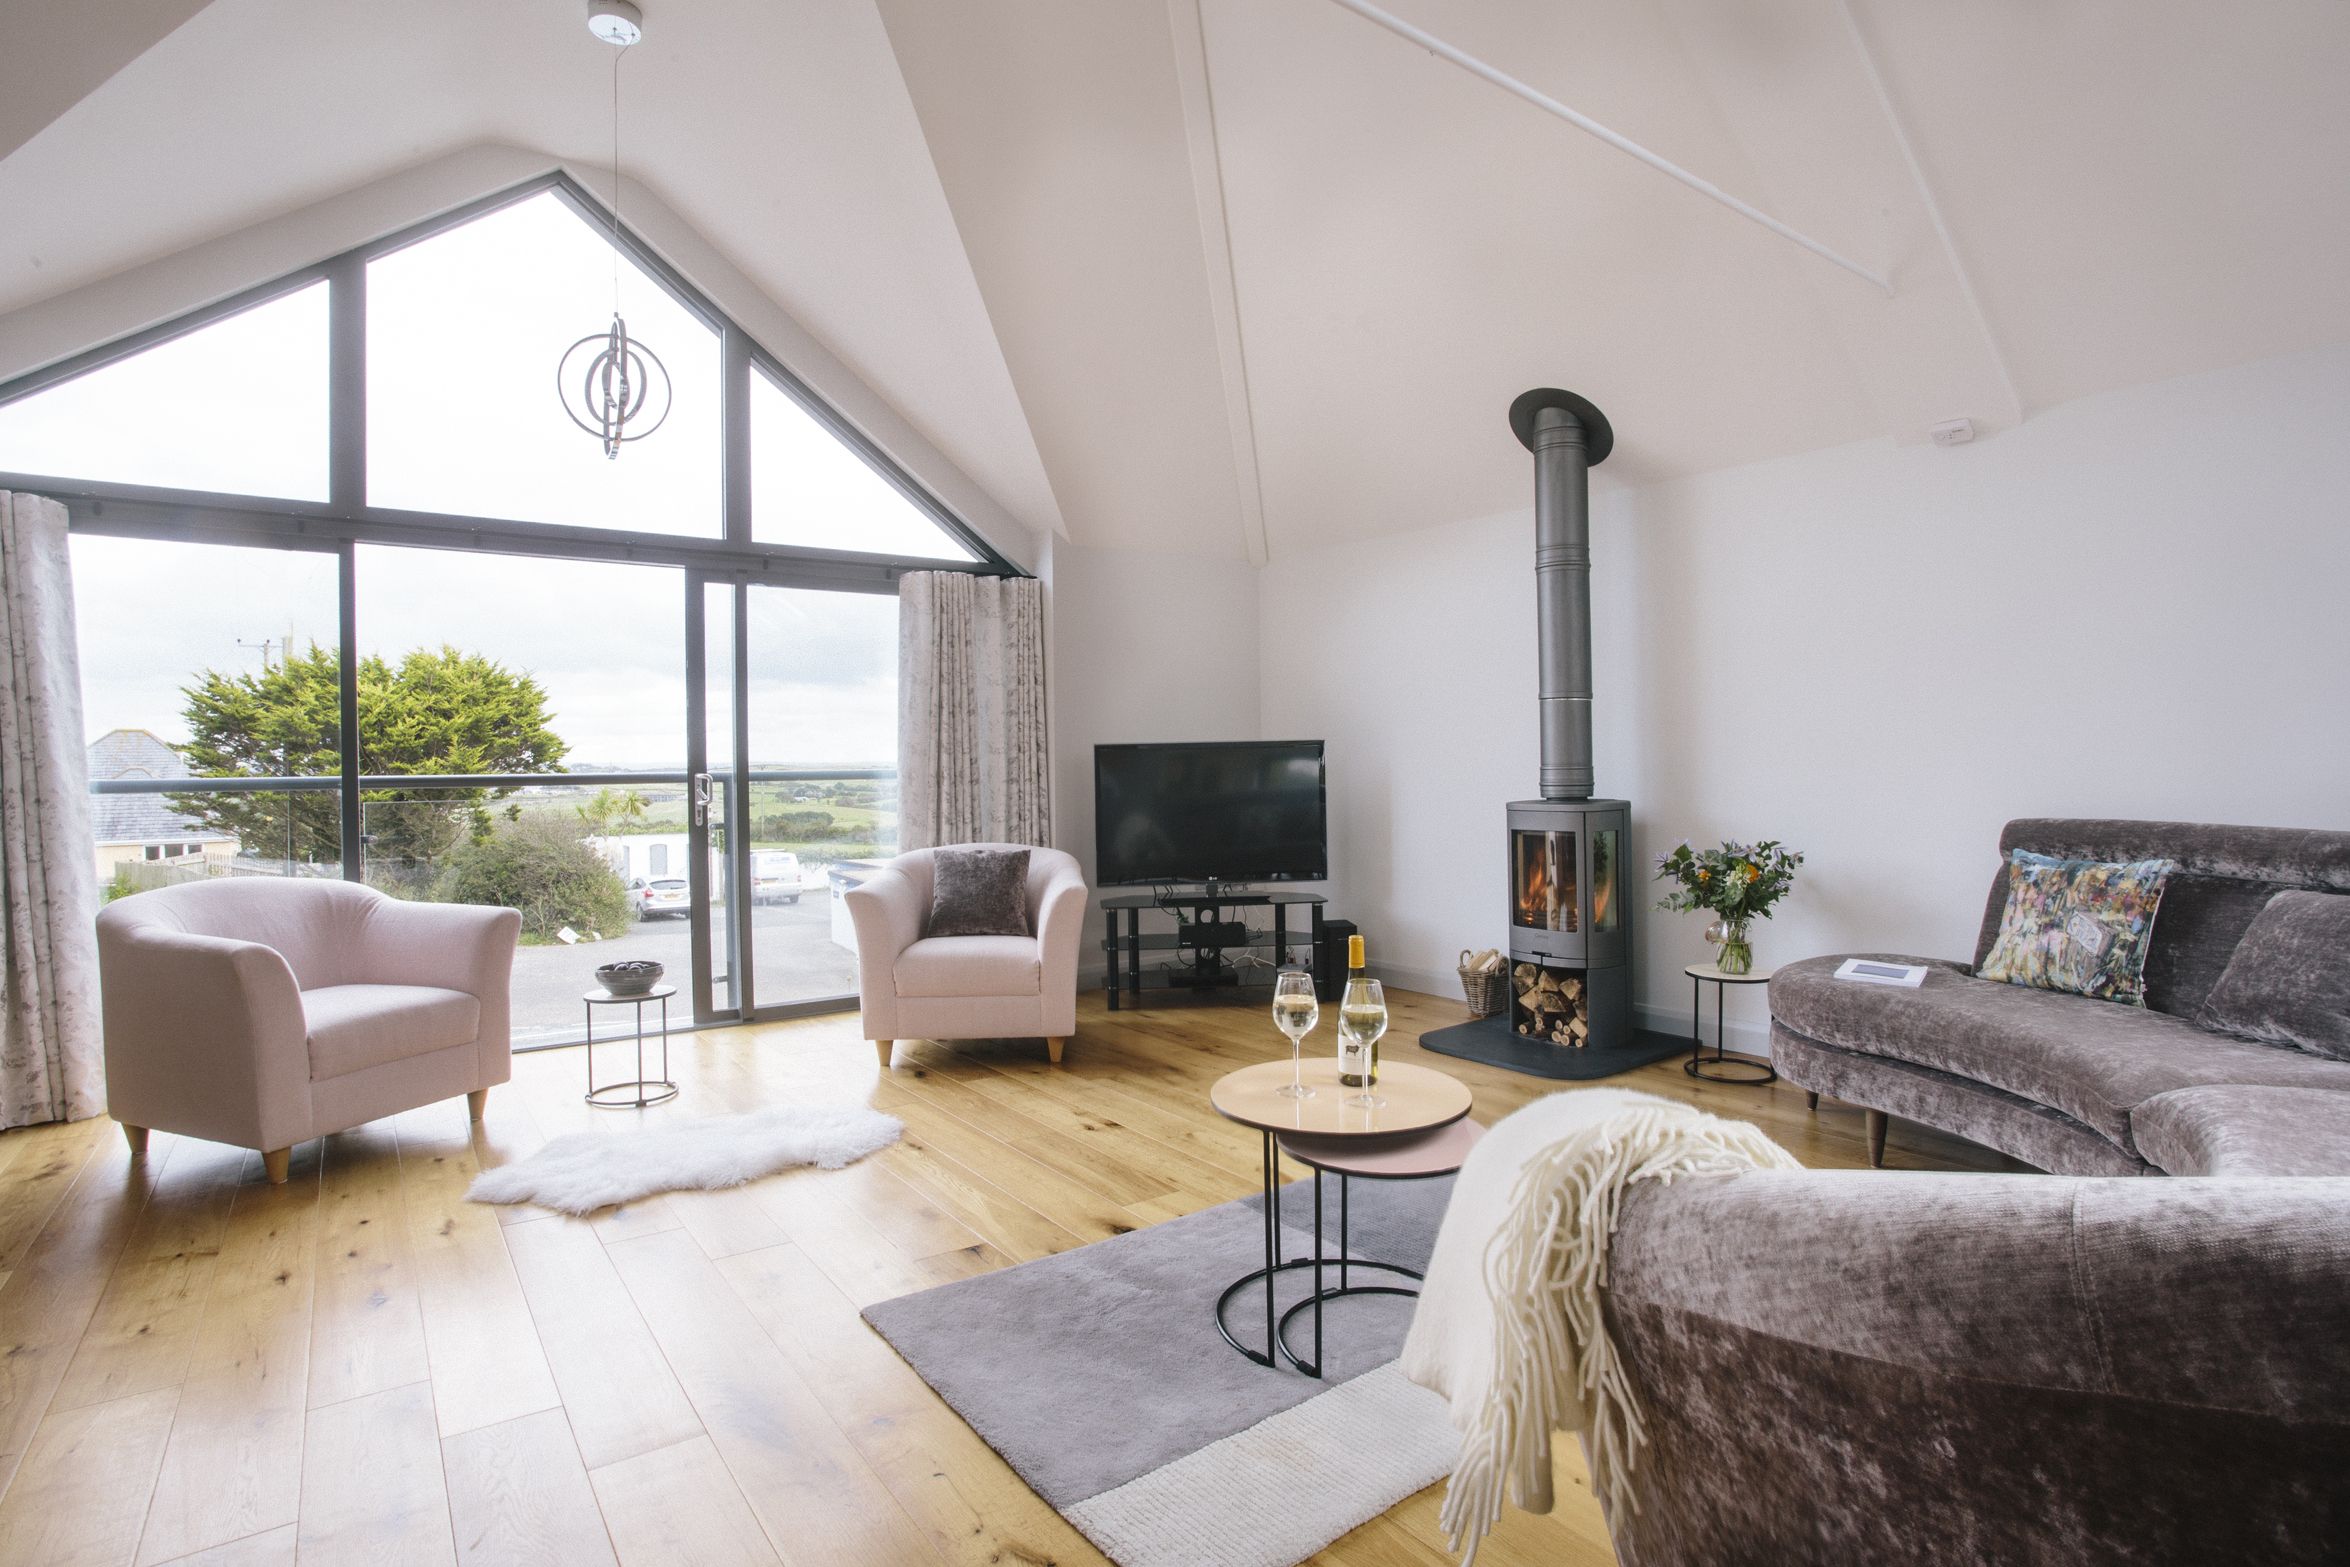 Lounge at Appleby, a self-catering holiday home near Daymer Bay, North Cornwall